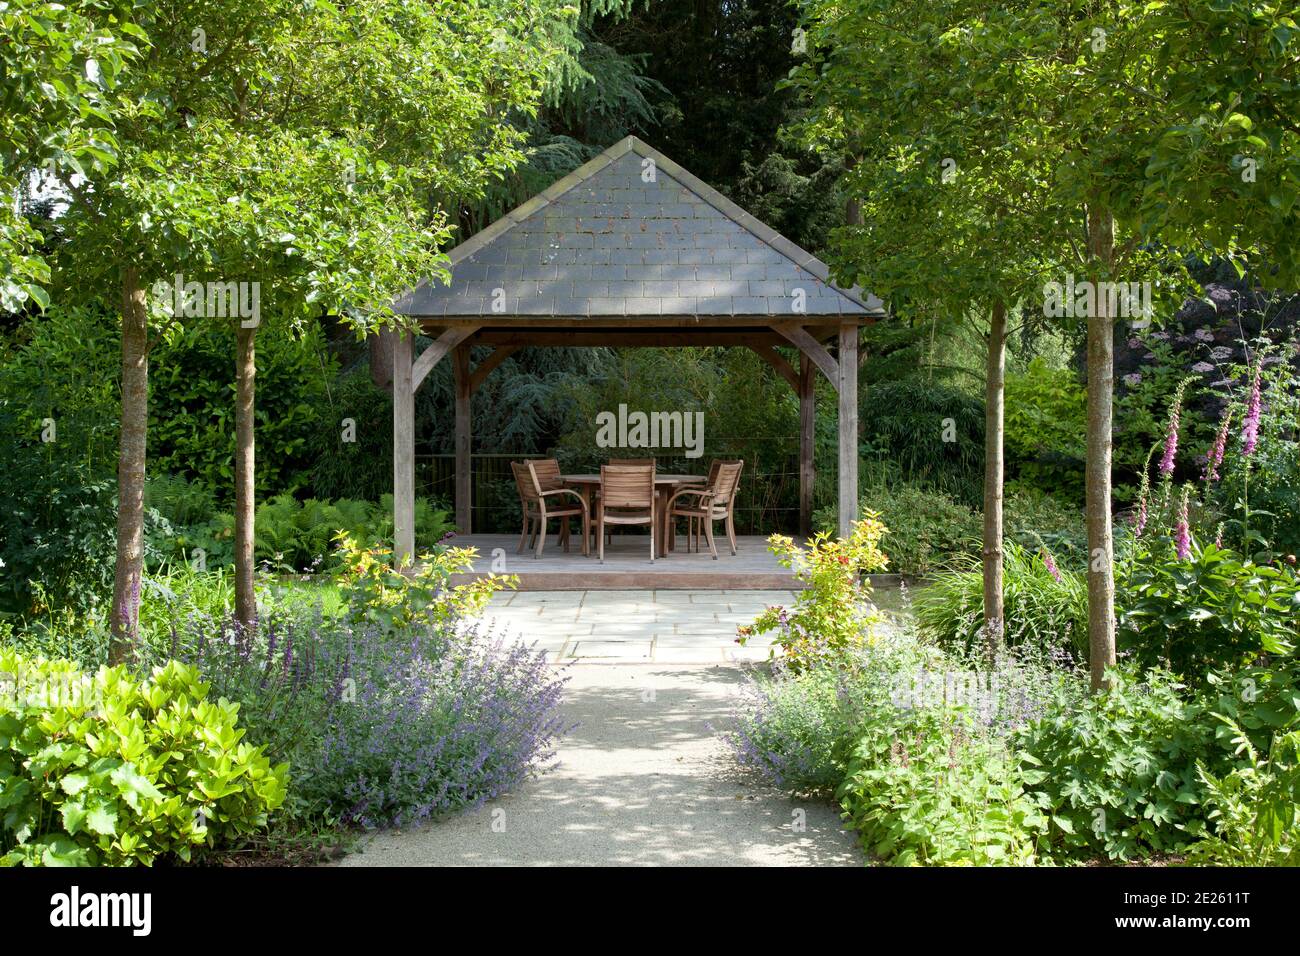 Gazebo with dining table down path in mature landscaped contemporary garden Stock Photo